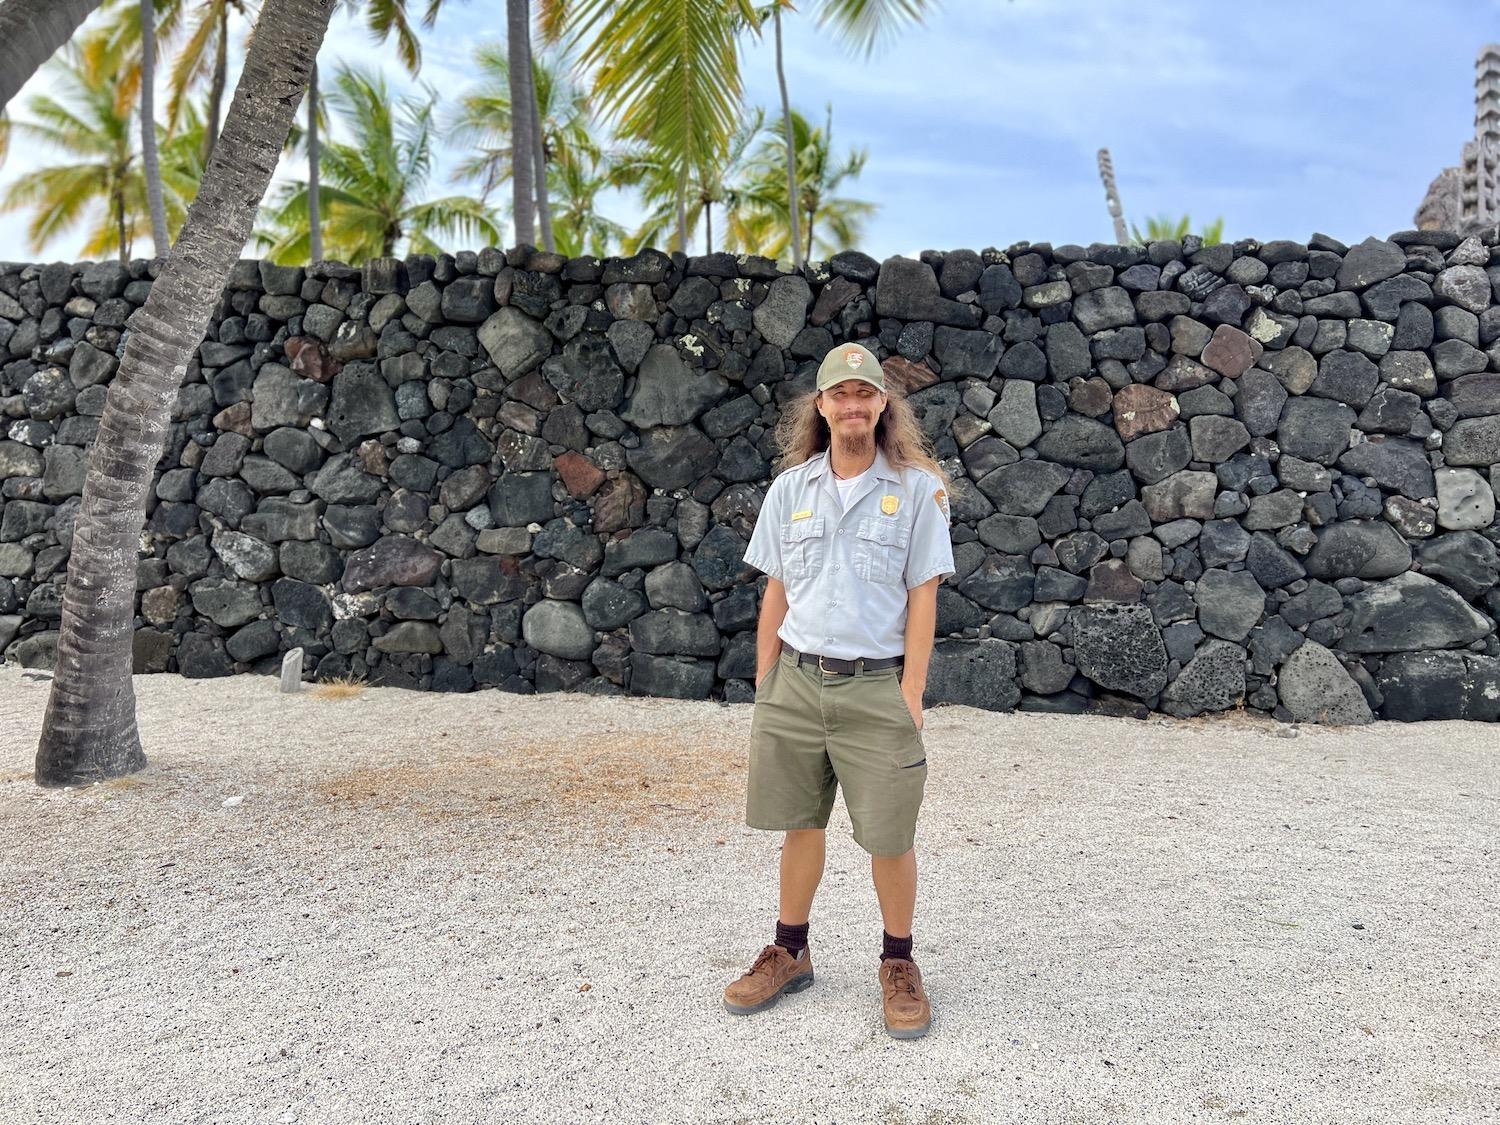 Now in uniform, interpretive ranger Kalā Holiday stands in the Royal Grounds by the Great Wall.